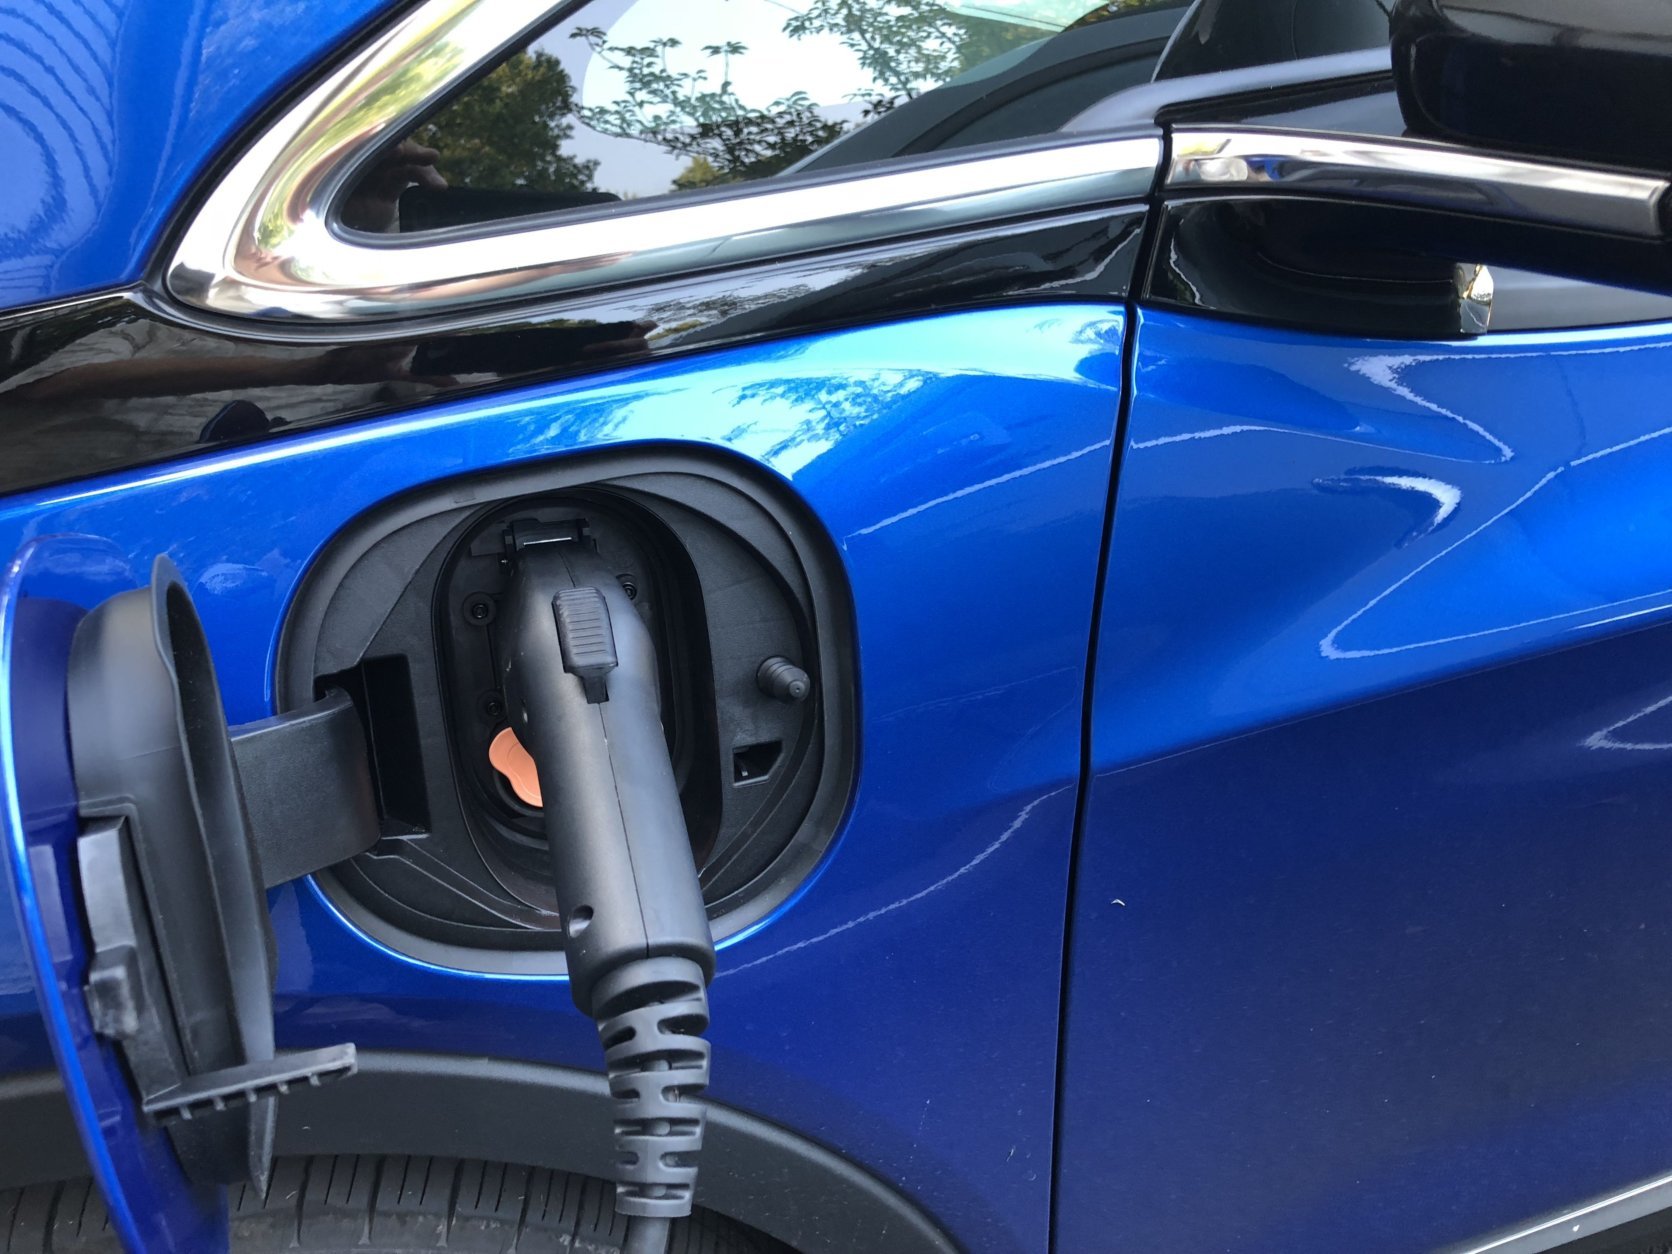 Charging times with normal household power could take up to 20 hours so choosing the $750 DC fast- charging port allows you to use a fast-charging station giving you 90 miles range in just 30 minutes. (WTOP/Mike Parris)